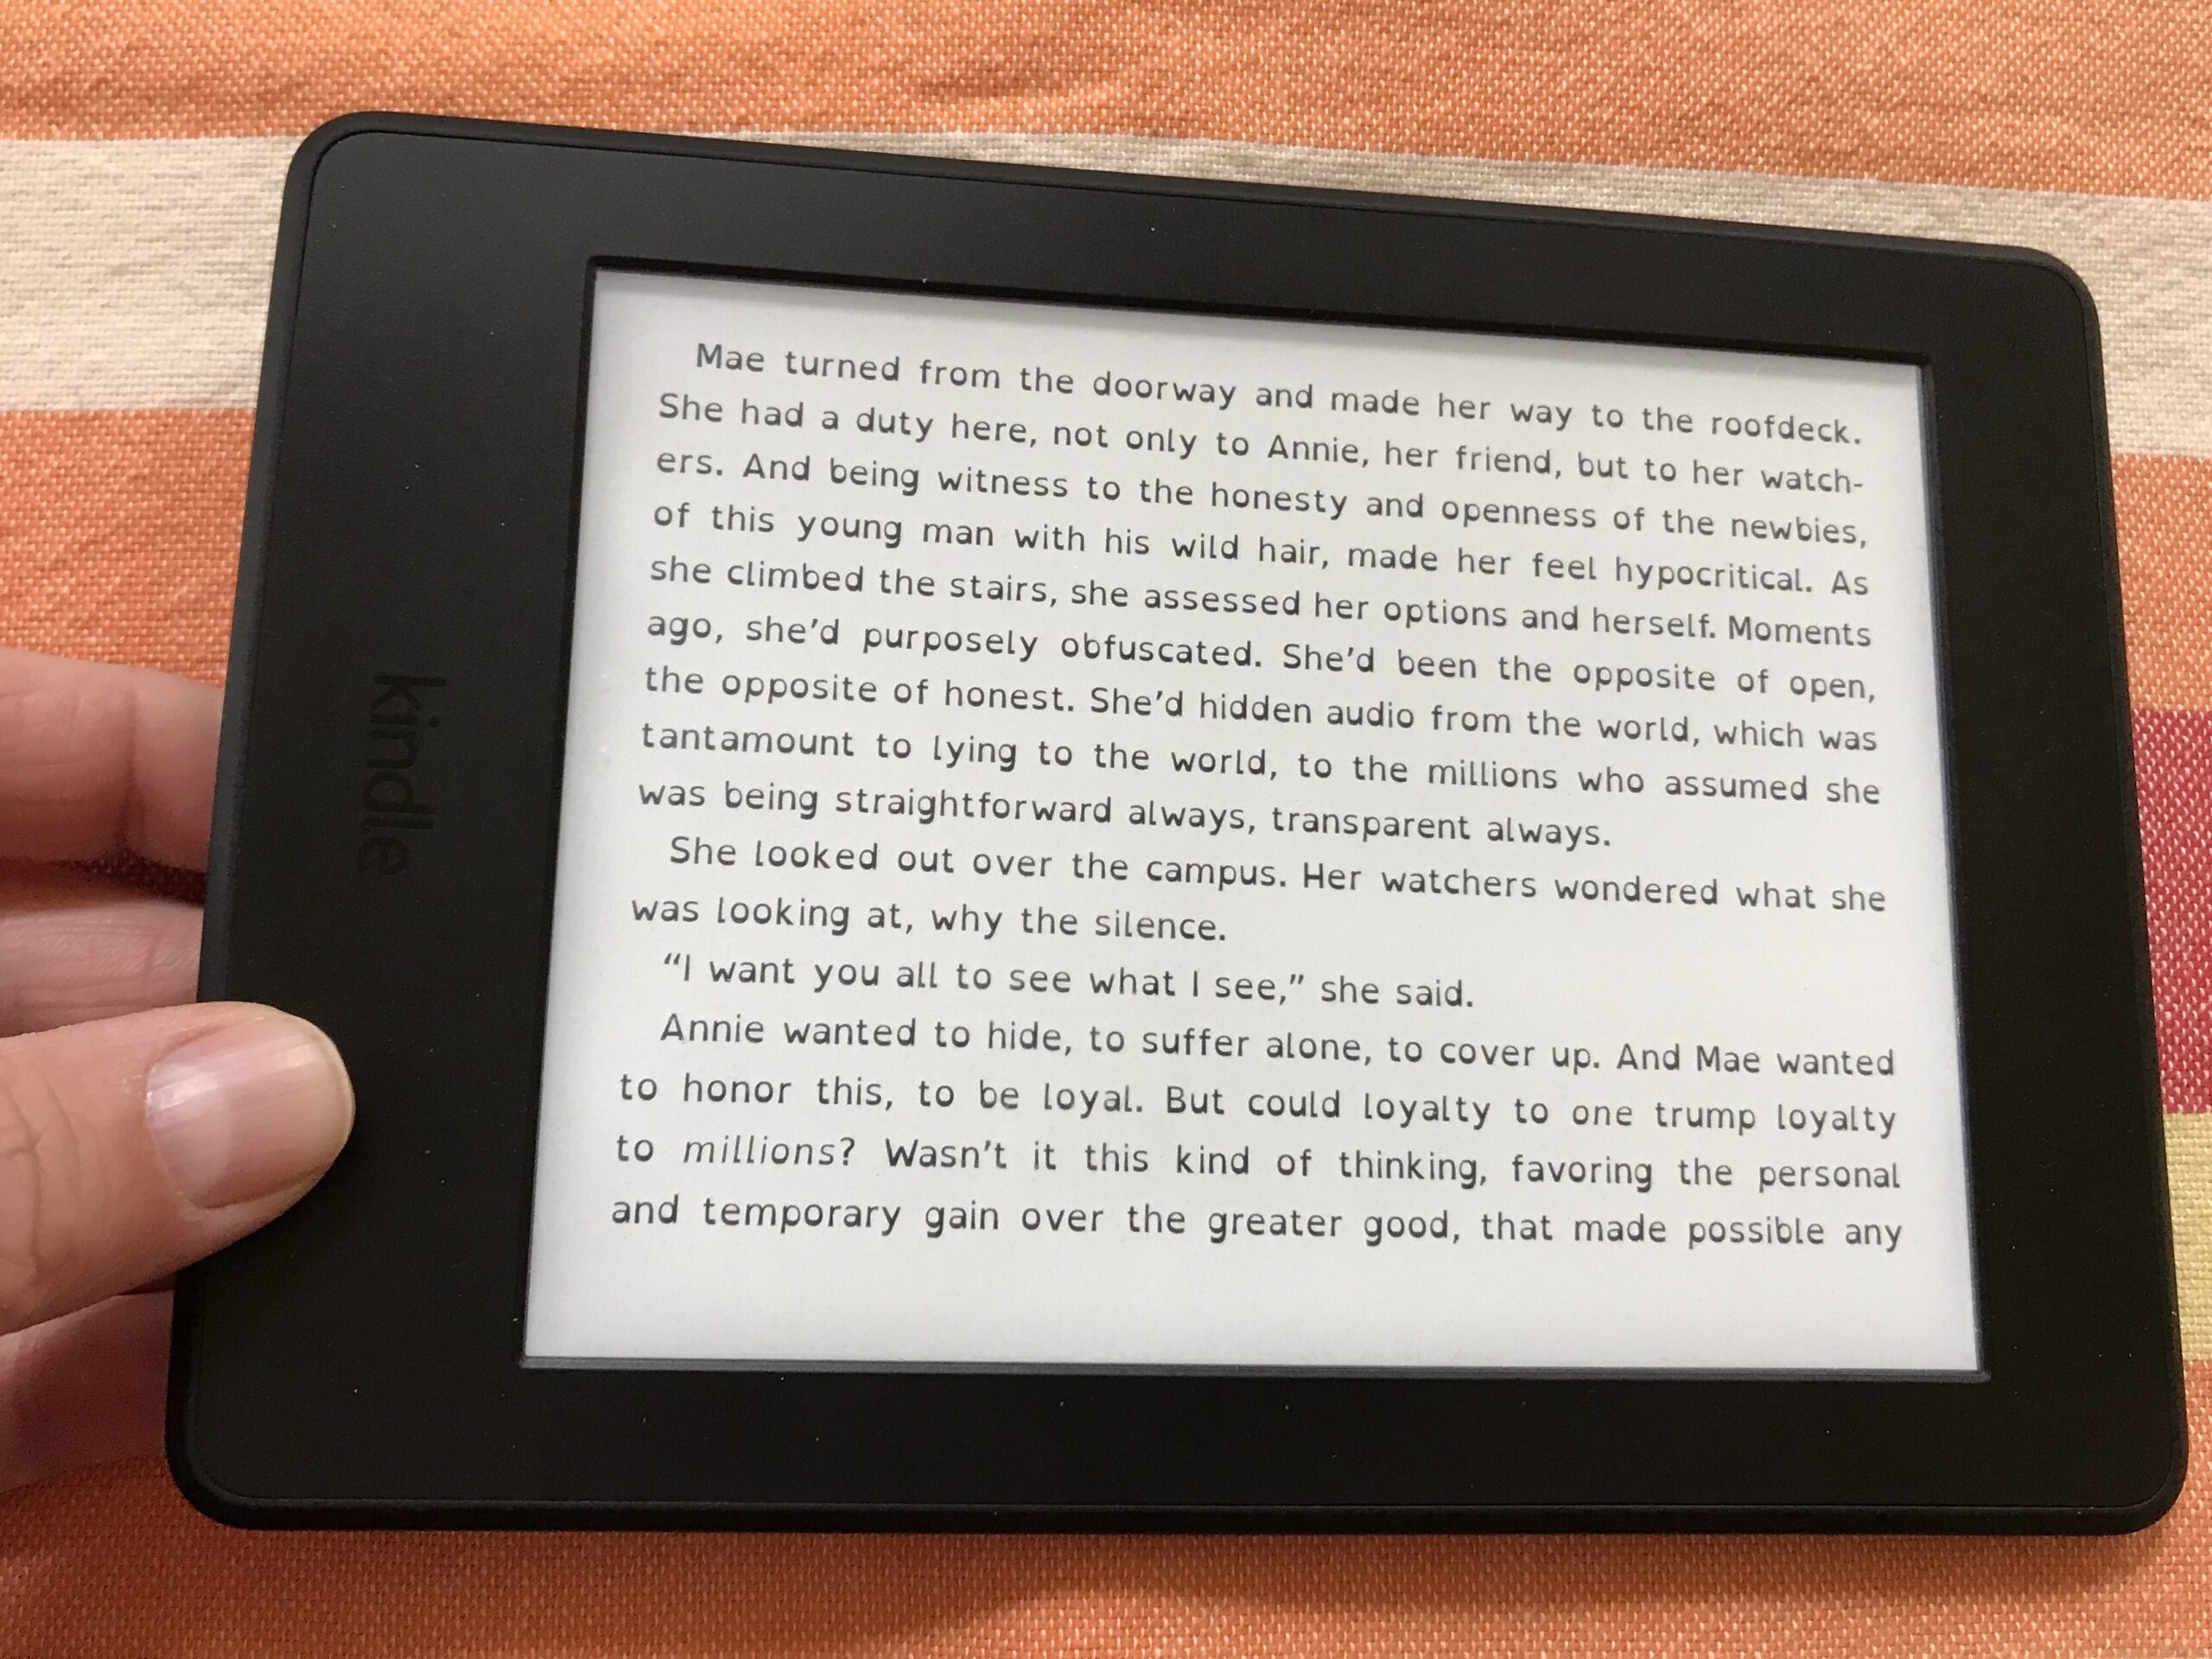 E-reader with the screen in landscape mode